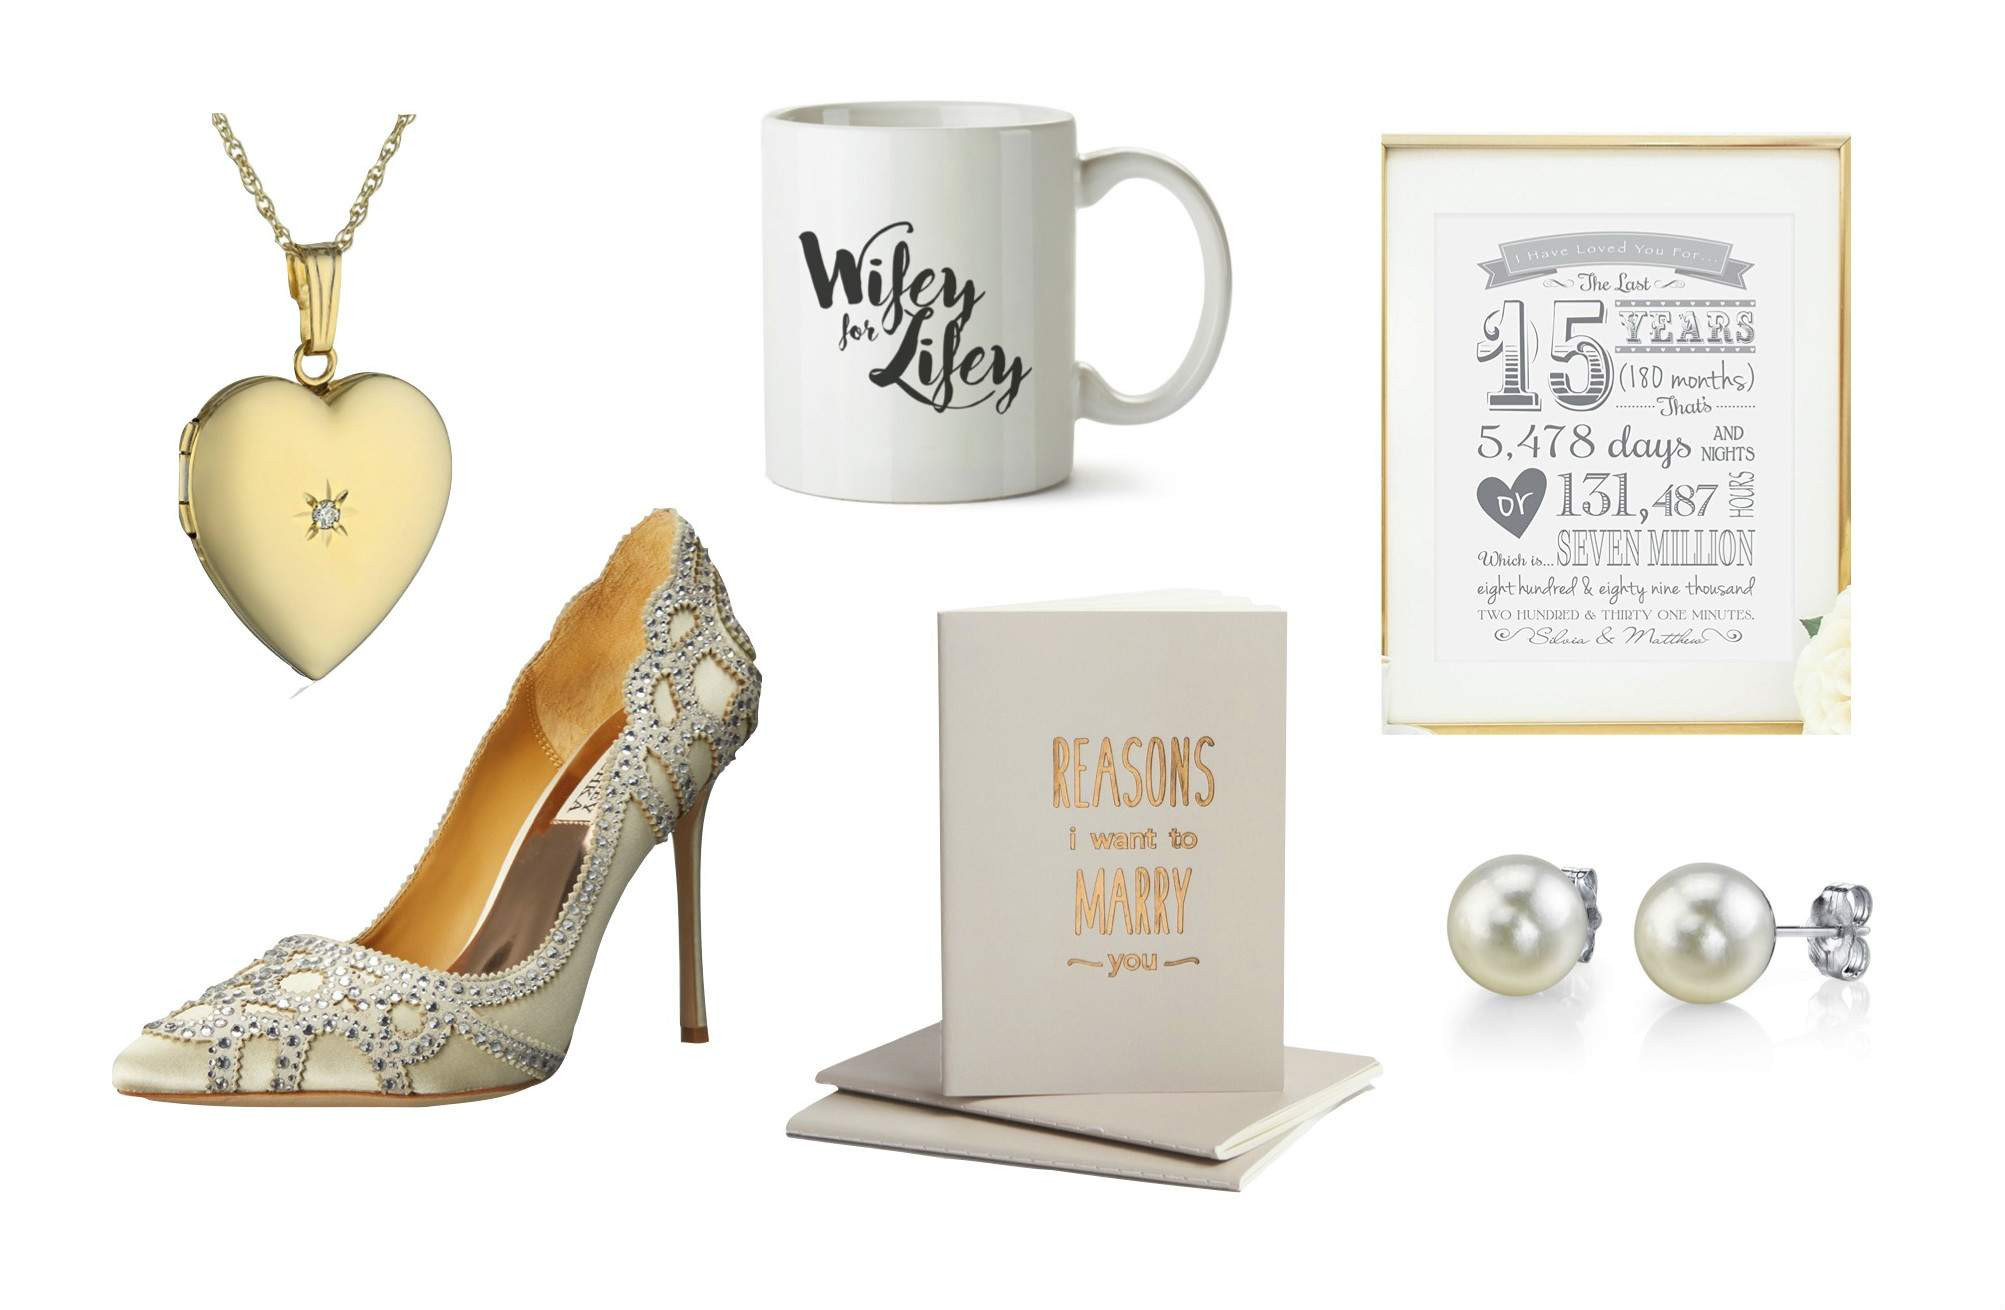 Wedding Gifts For Bride
 Best Wedding Day Gift Ideas From the Groom to the Bride